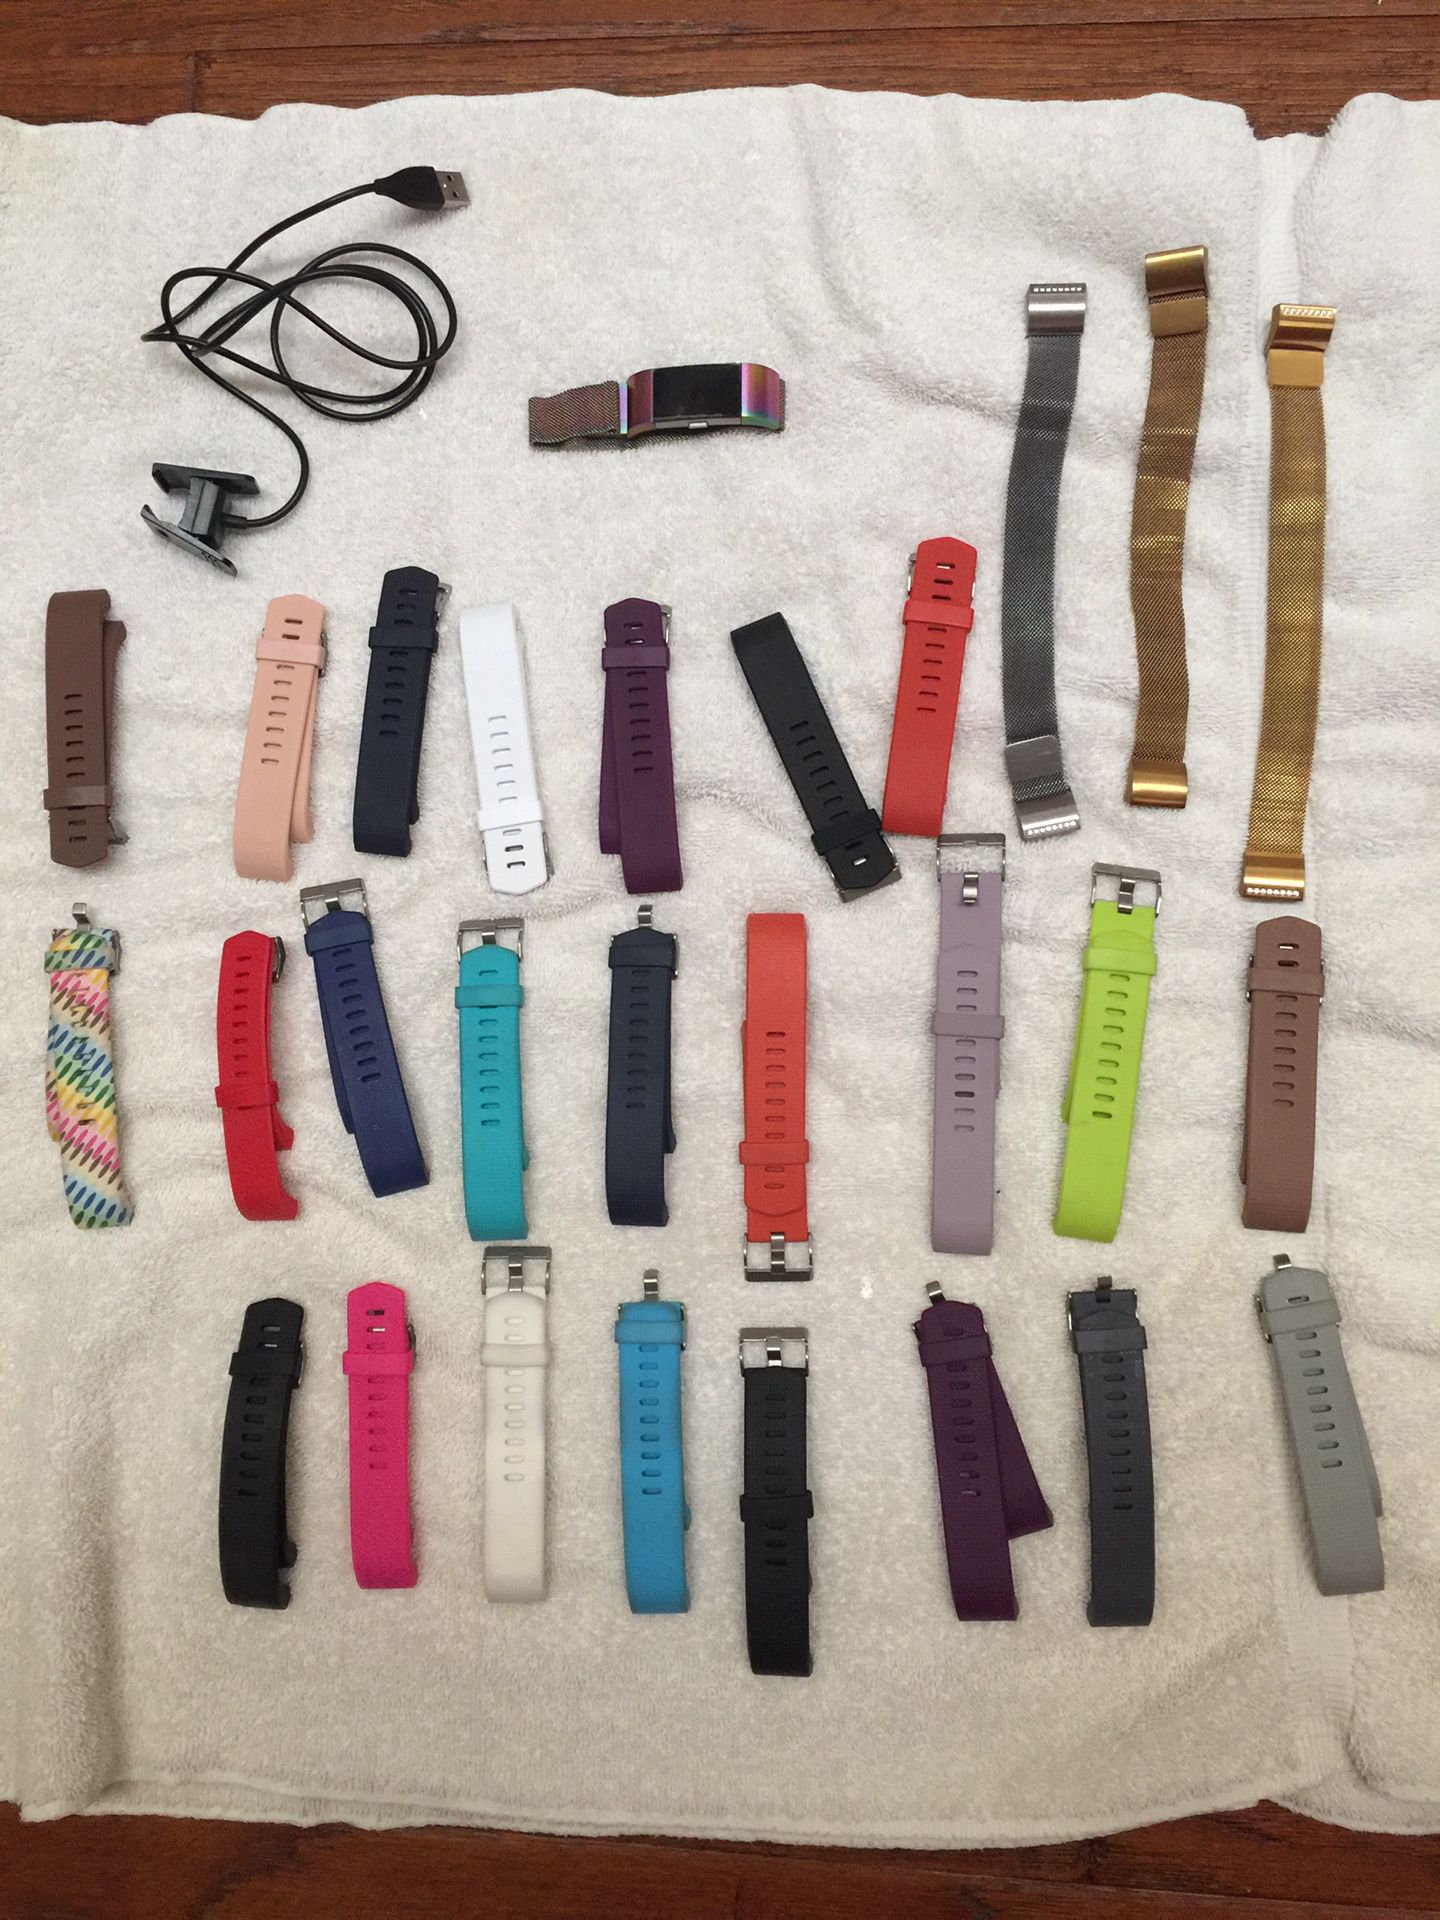 FitBit Charge2 with charger and bands